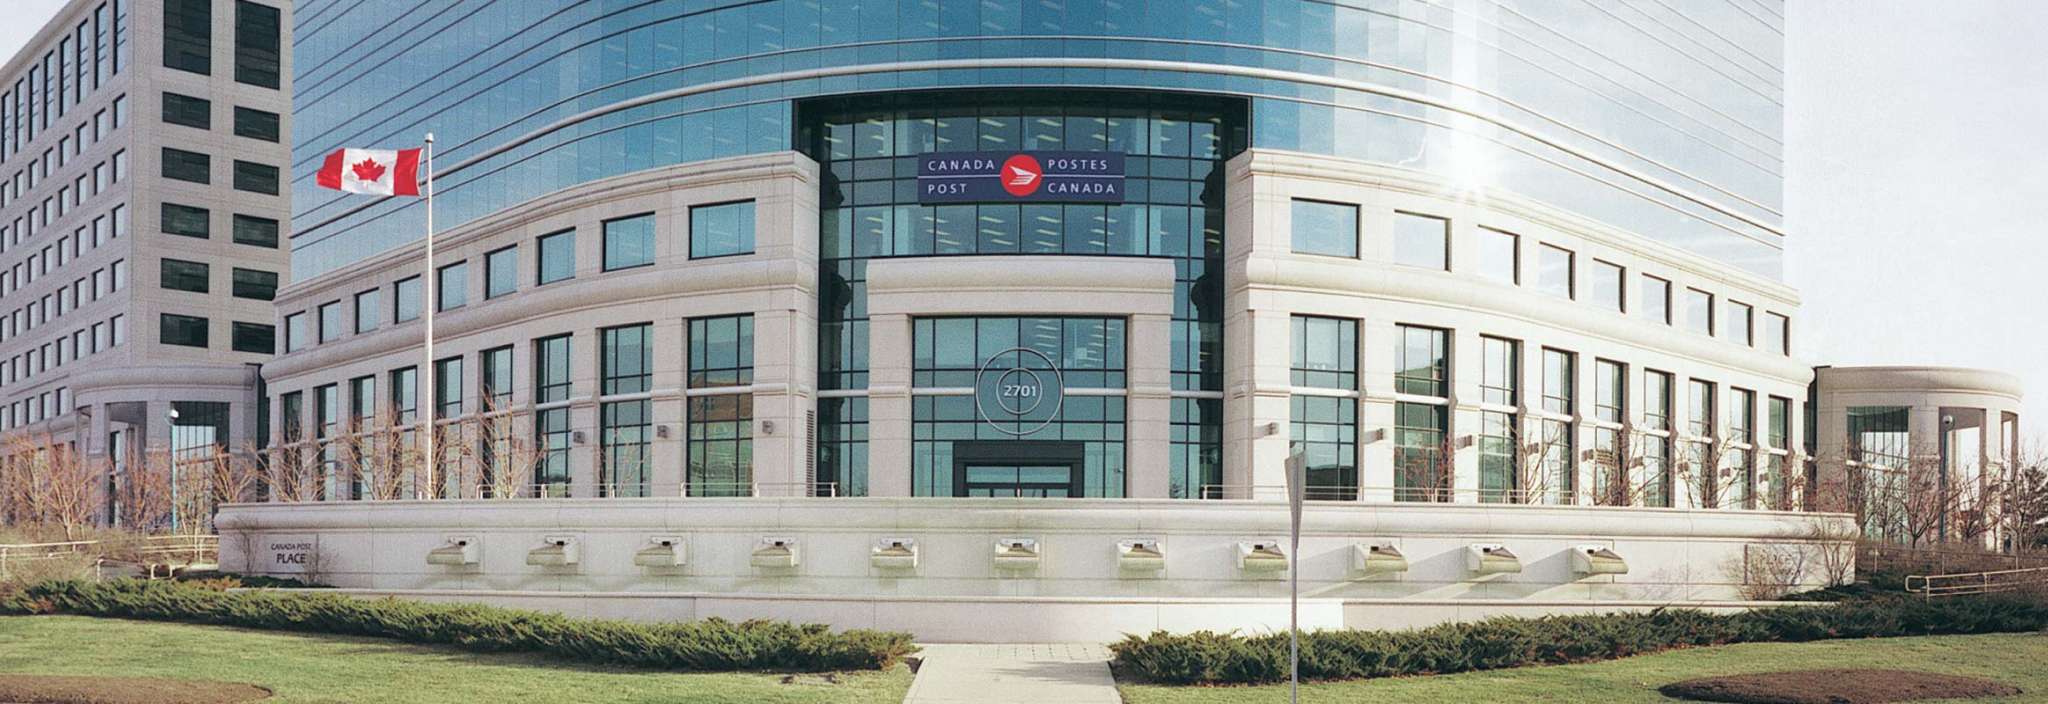 A Canadian flag flies in front of the Canada Post headquarters. The building features granite columns and expansive glass windows.